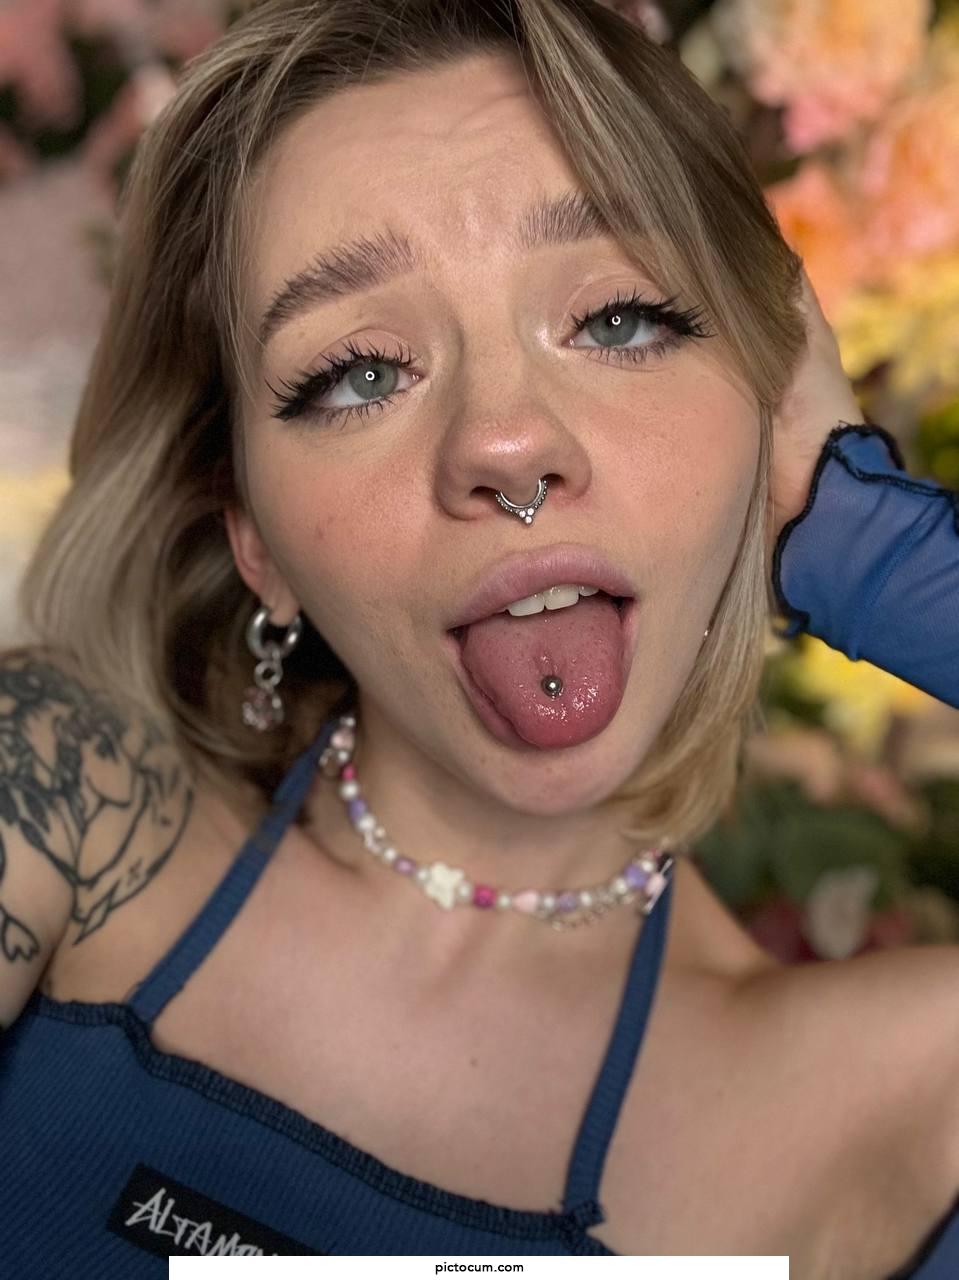 you'd give my sweet ahegao all your cum, wouldn't you